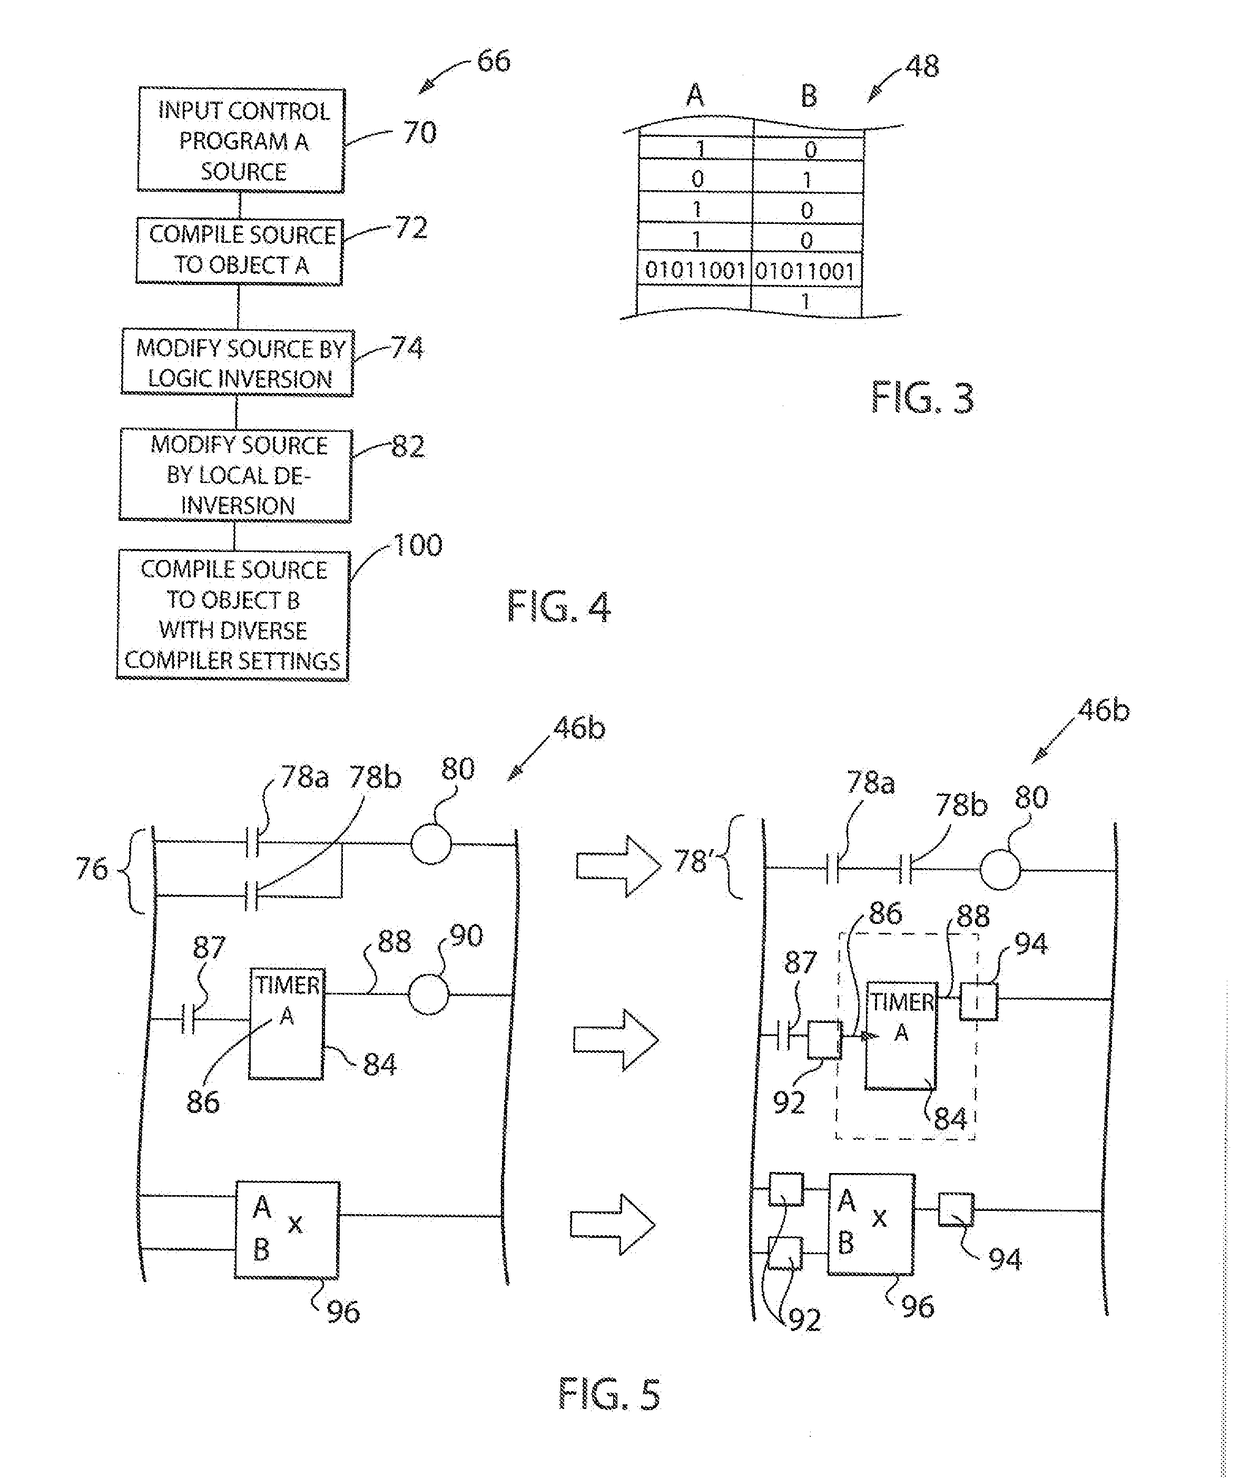 Safety Industrial Controller Providing Diversity in Single Multicore Processor